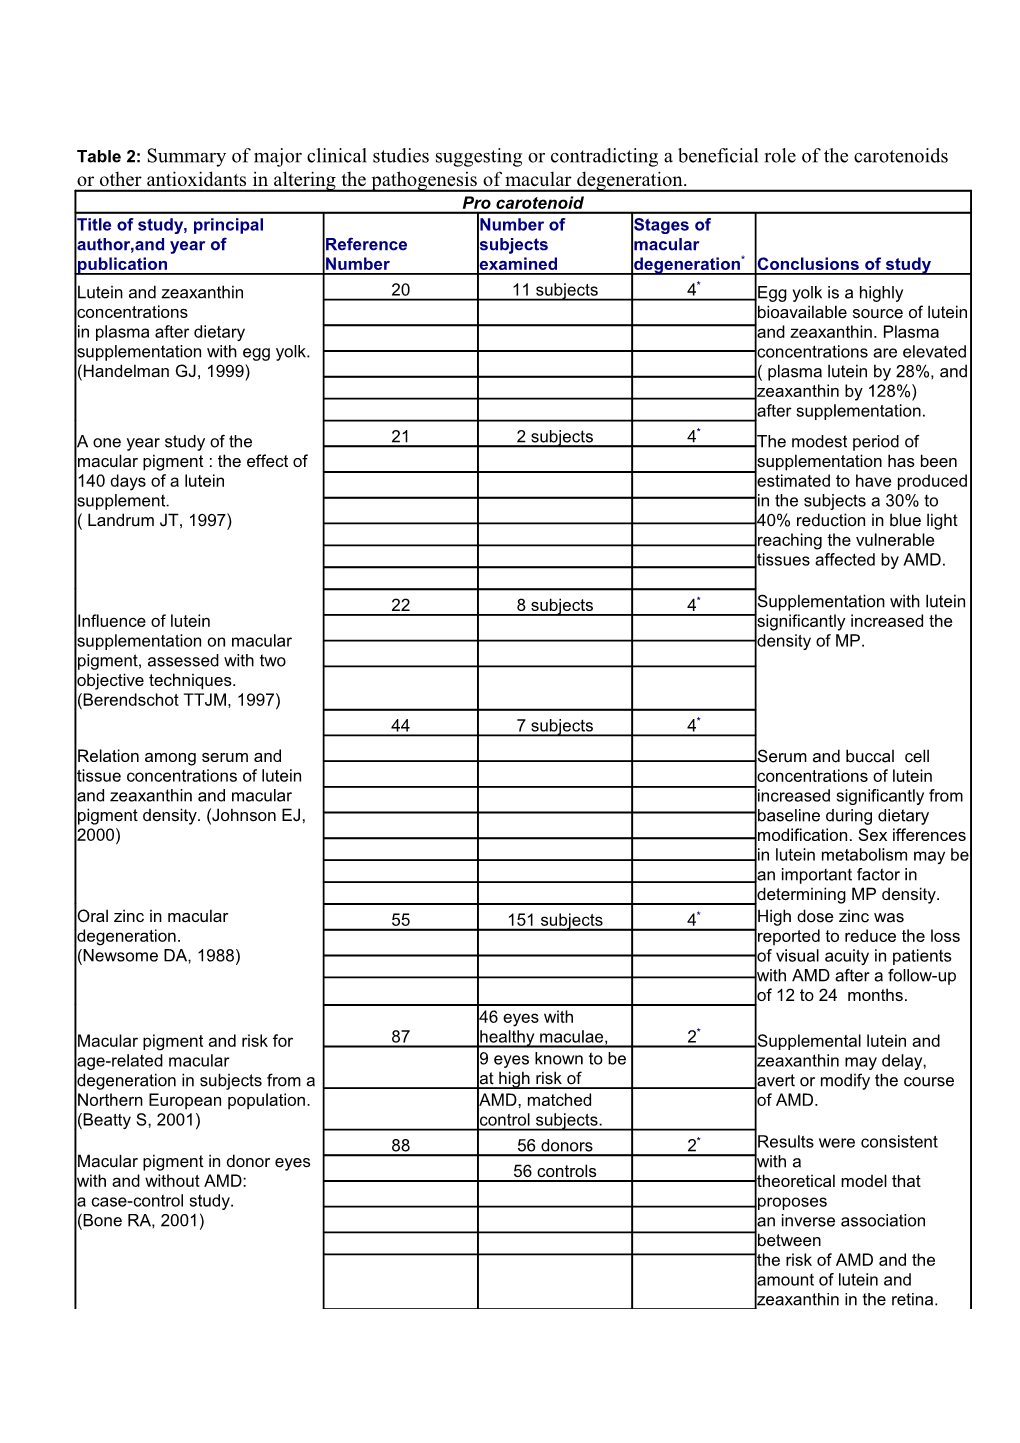 Table 2: Summary of Major Clinical Studies Suggesting Or Contradicting a Beneficial Role